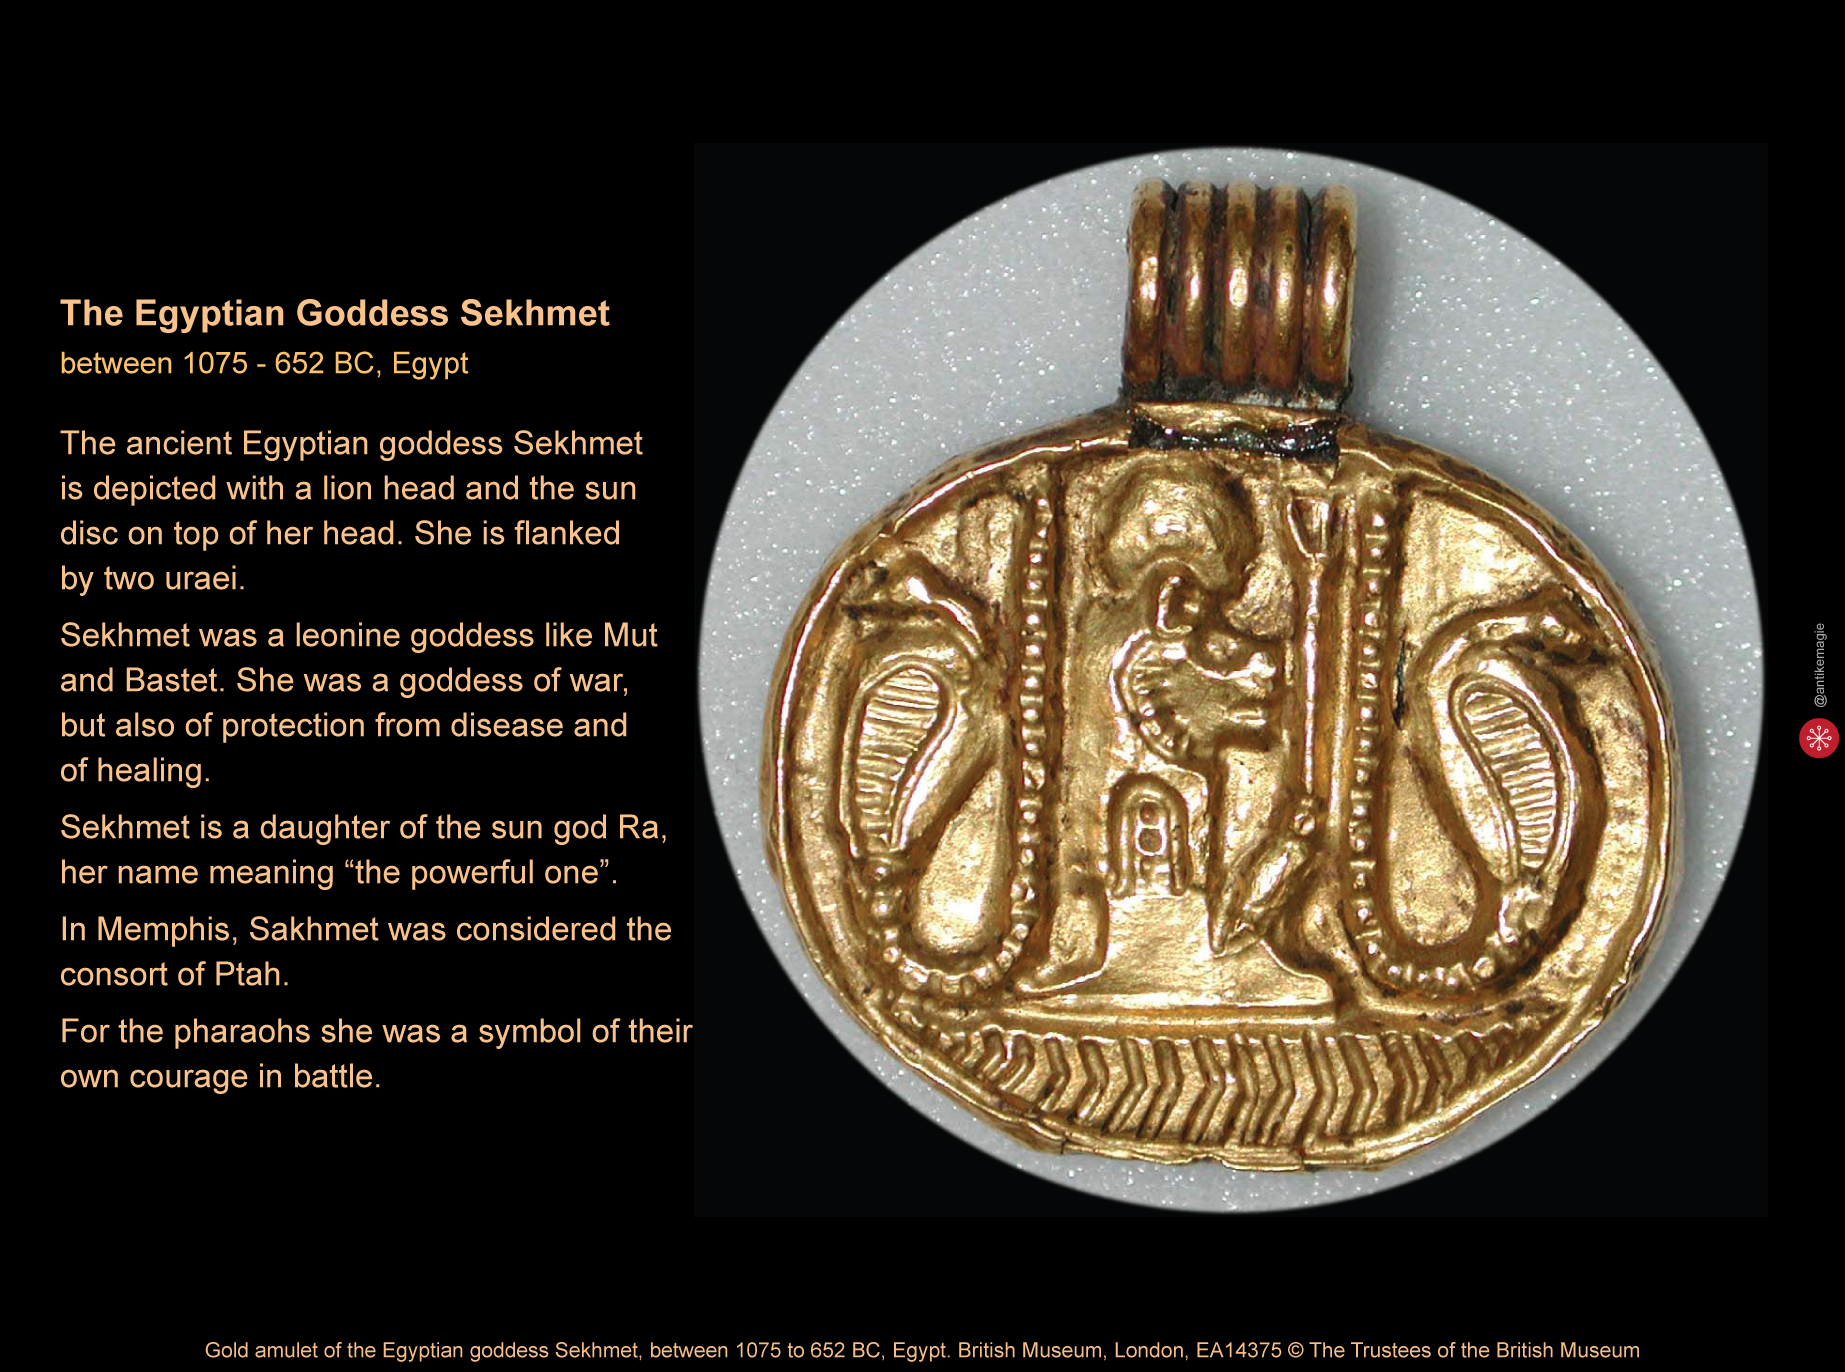 Gold amulet of the Egyptian goddess Sekhmet, between 1075 to 652 BC, Egypt. British Museum, London, EA14375 © The Trustees of the British Museum